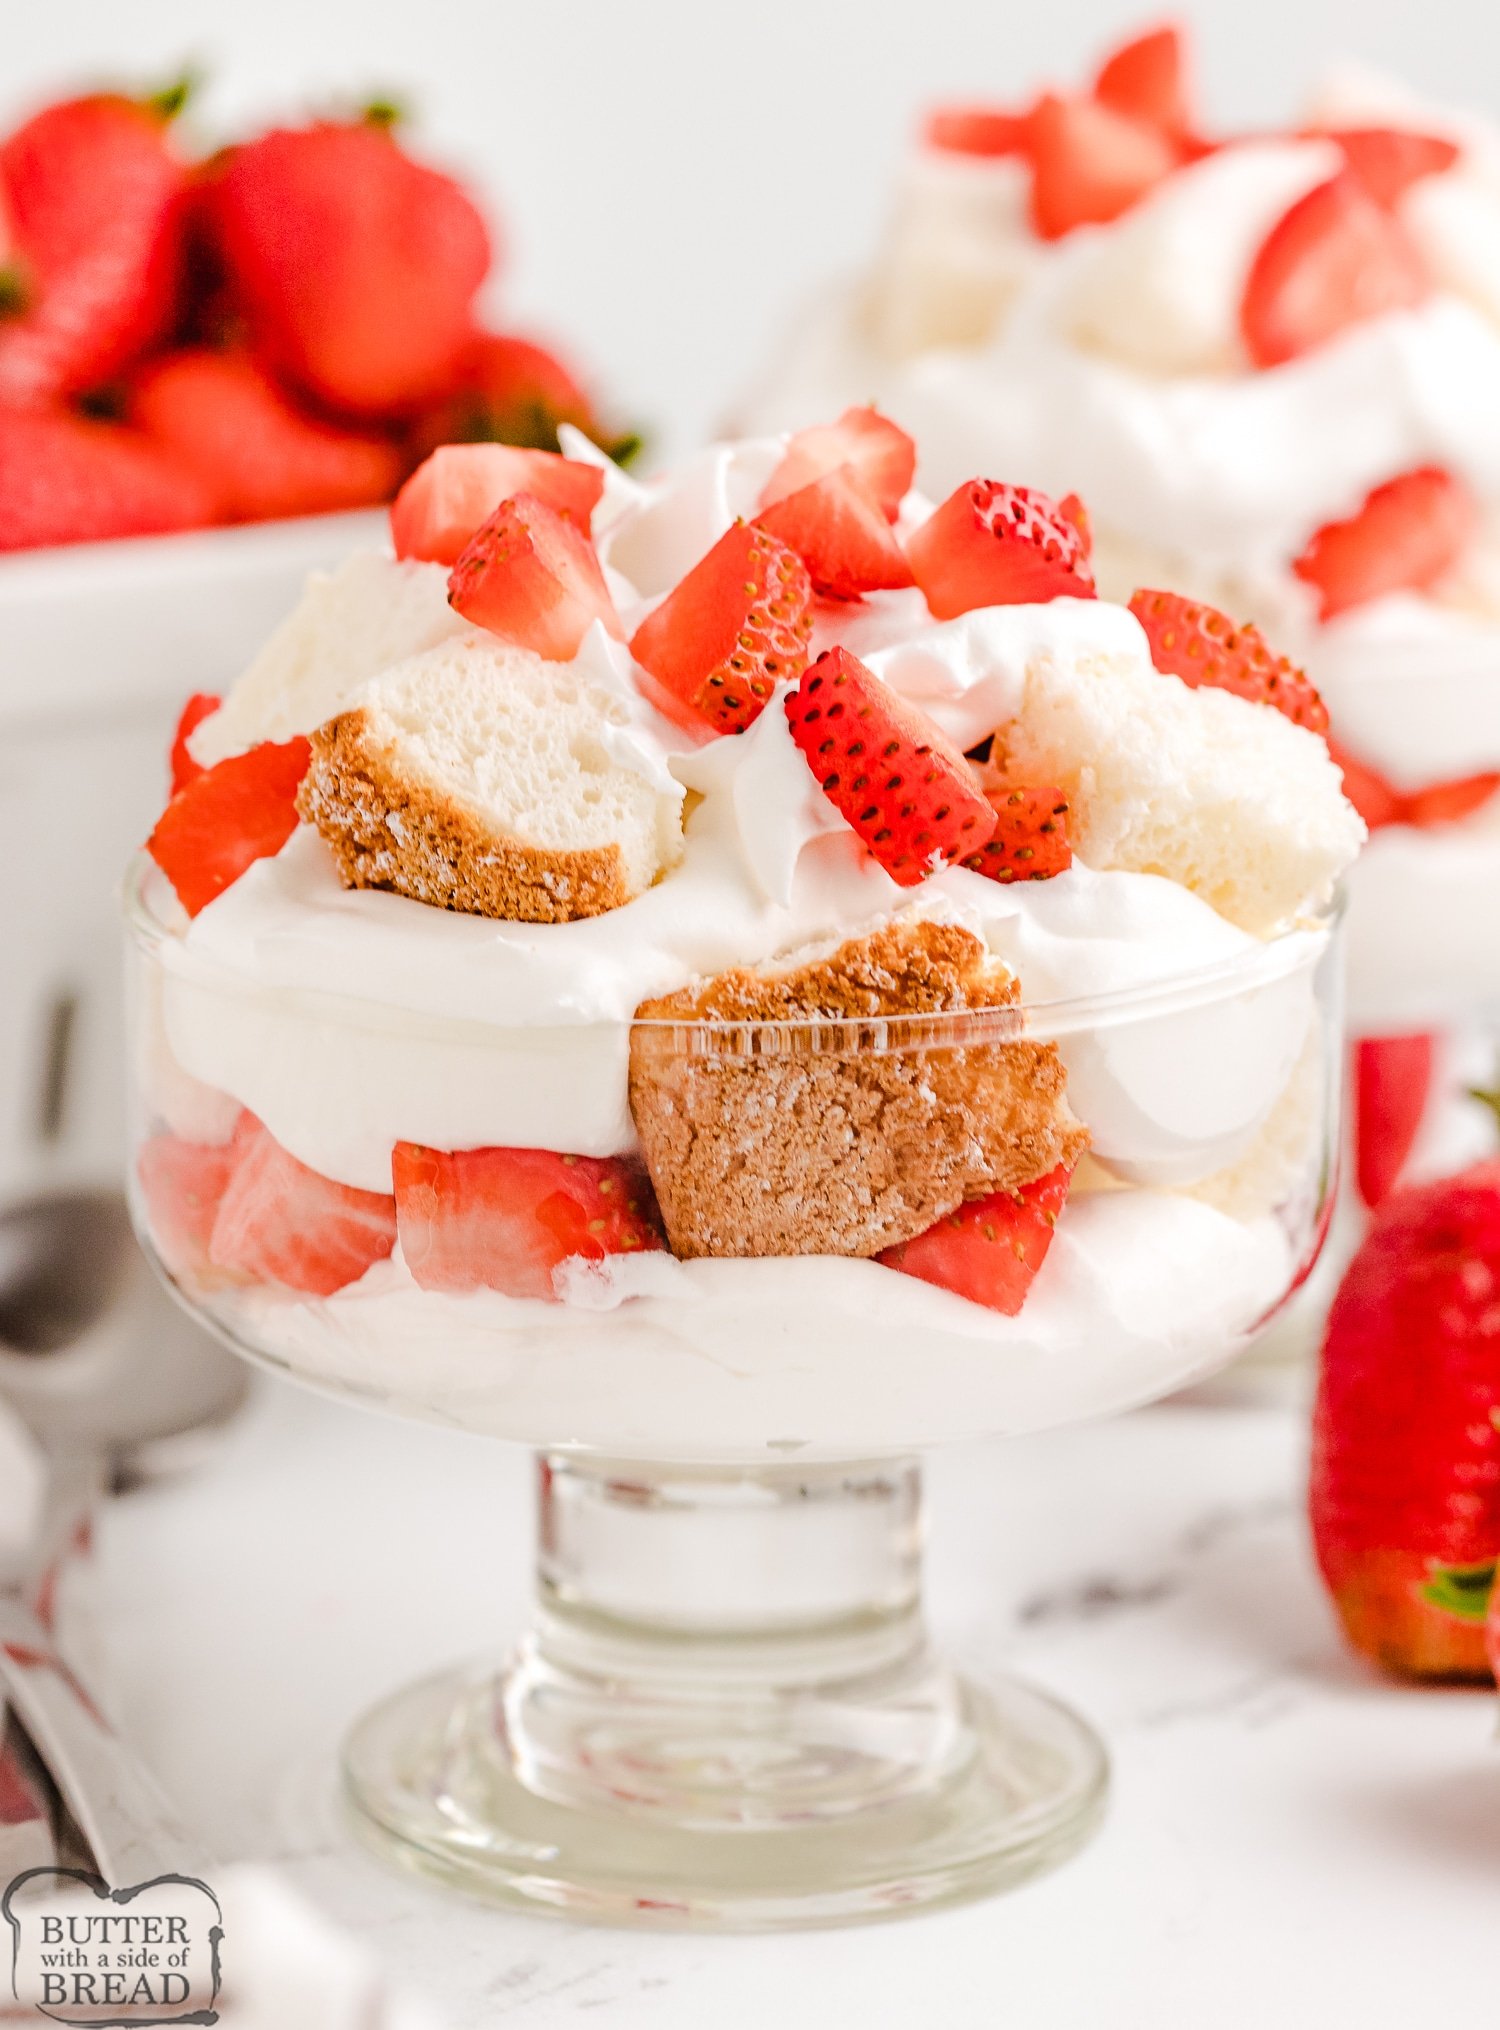 angel food cake cubed and topped with strawberries and whipped cream as parfaits